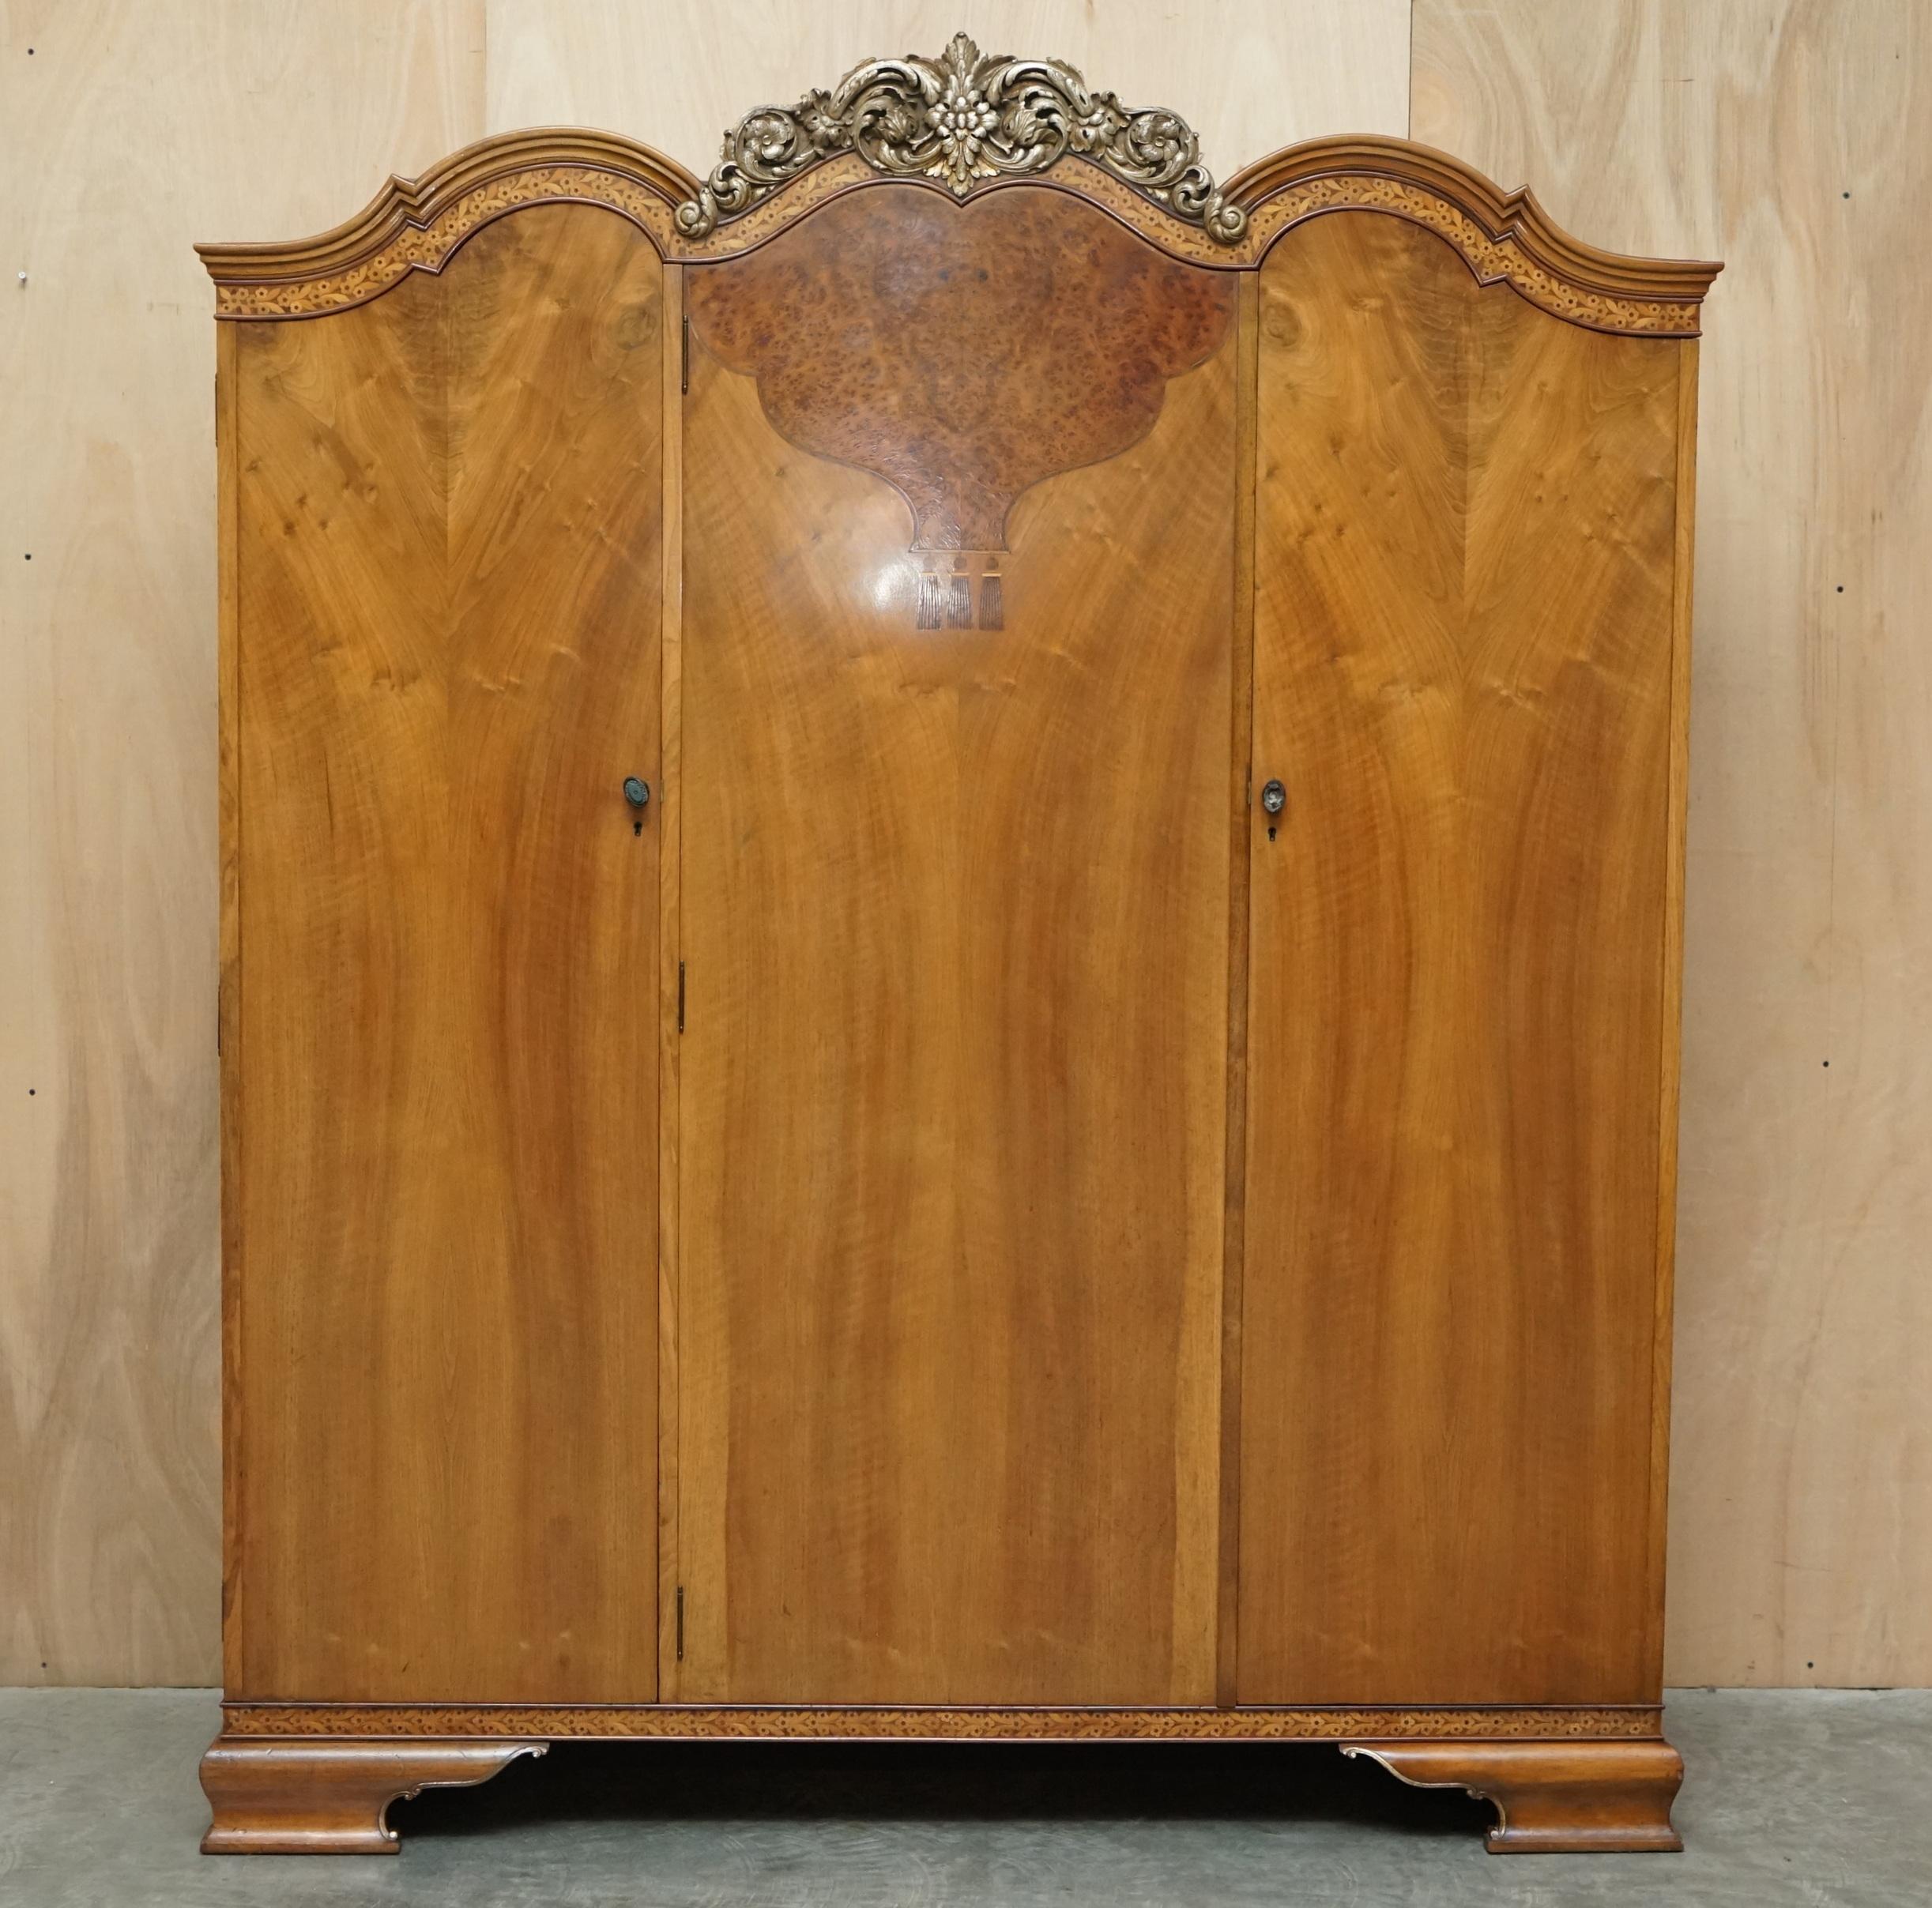 We are delighted to offer for sale this finest quality Waring & Gillow Lancaster, burr walnut inlaid wardrobe which is part of a suite.

This piece is part of a bedroom set, I have in total a triple bank wardrobe, dressing table with trifold